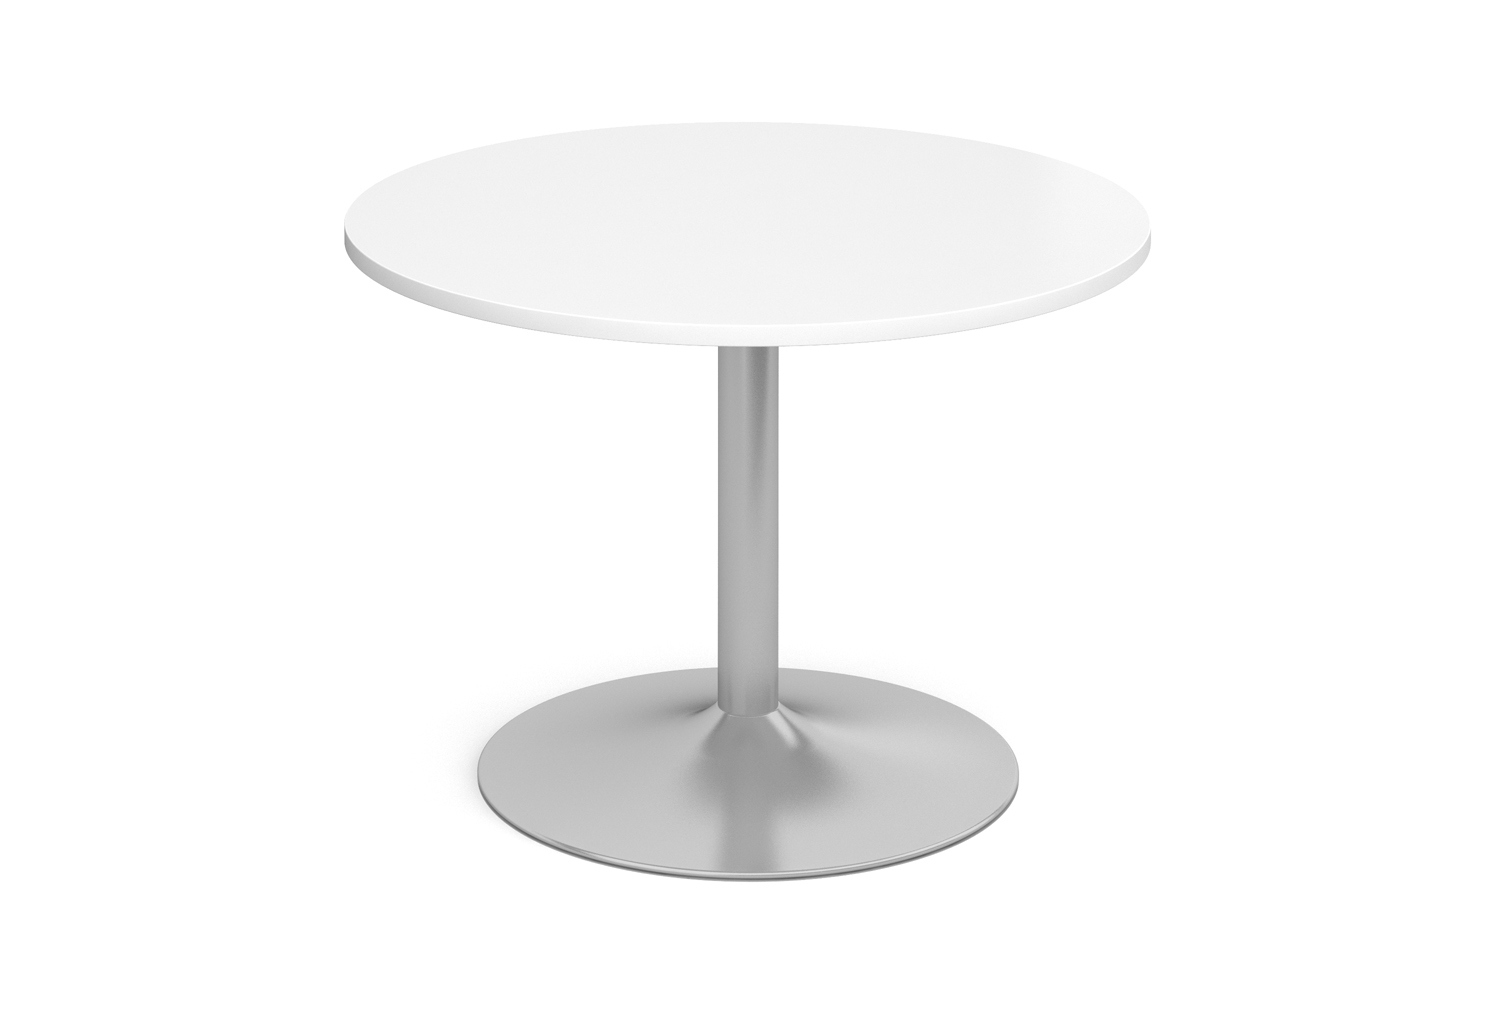 Trumpet Base Circular Boardroom Table, 120diax73h (cm), White Frame, White, Fully Installed